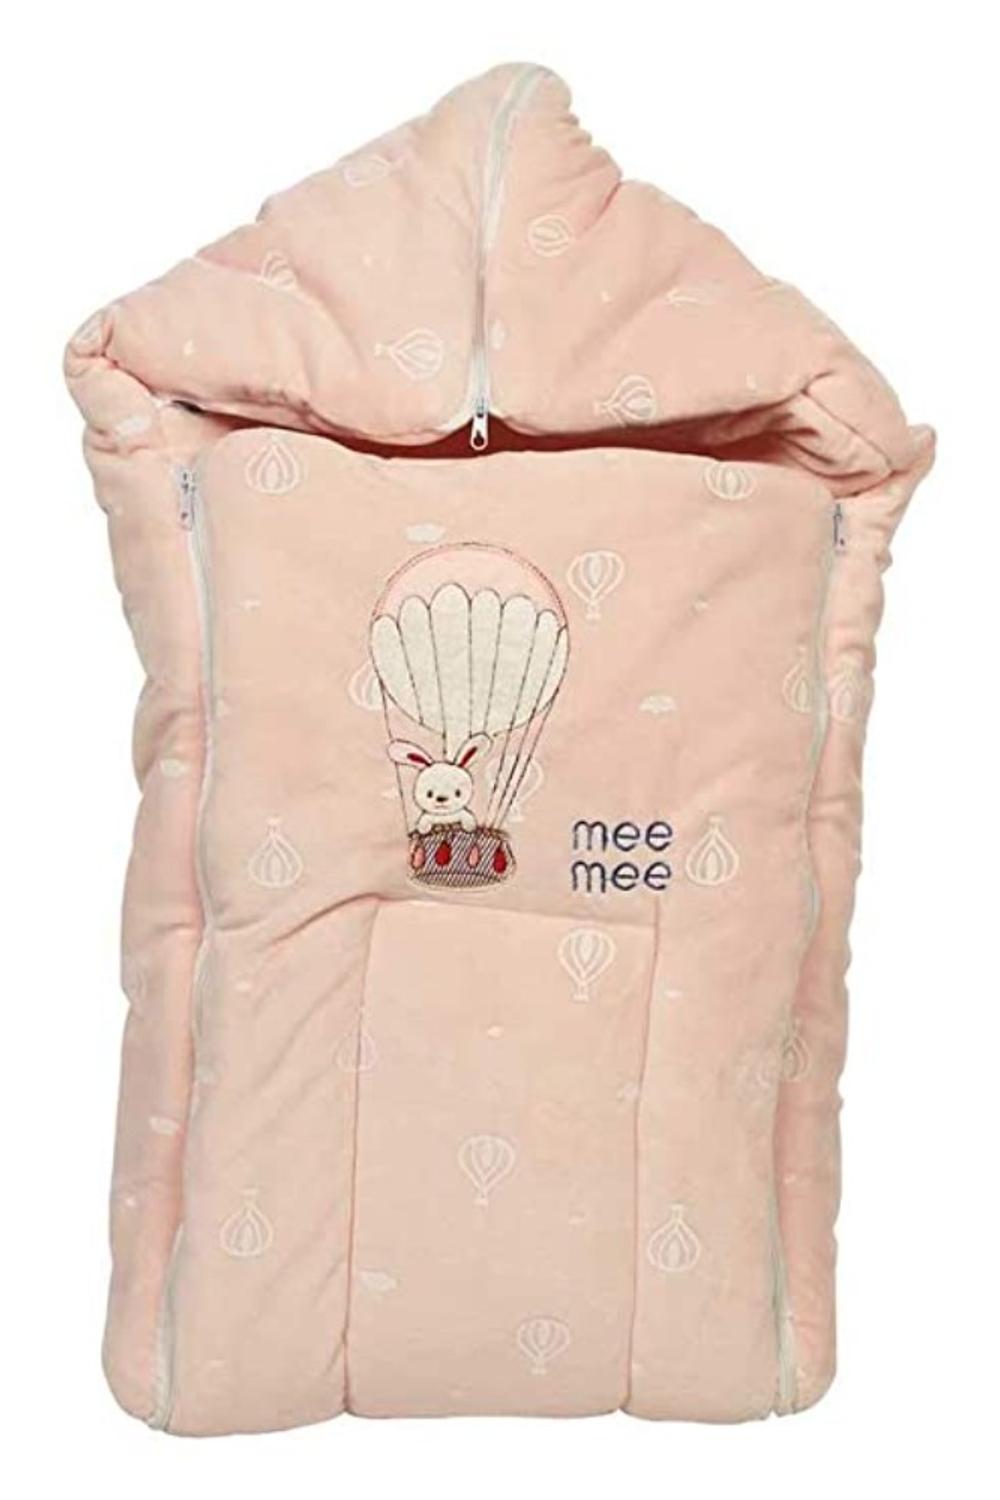 Mee Mee 3 in 1 Baby Carry Nest with Sleeping Bag and Mattress (Pink) (Pink Ballon Print)